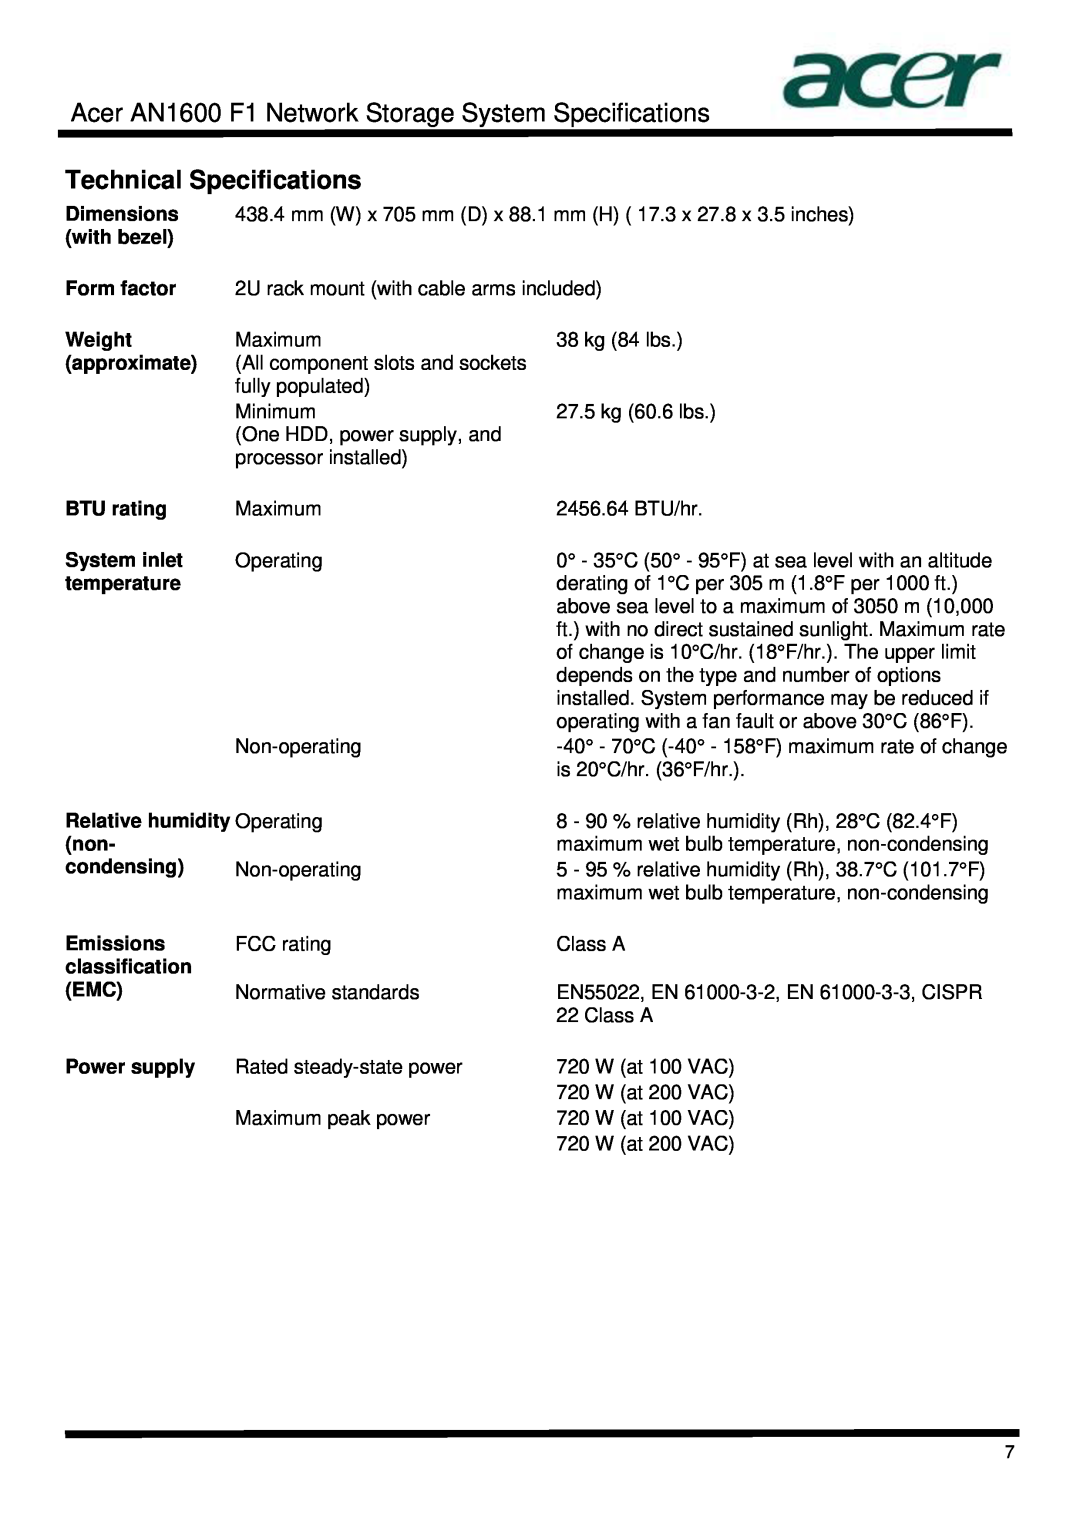 Acer Technical Specifications, Acer AN1600 F1 Network Storage System Specifications, with bezel, Form factor, Weight 